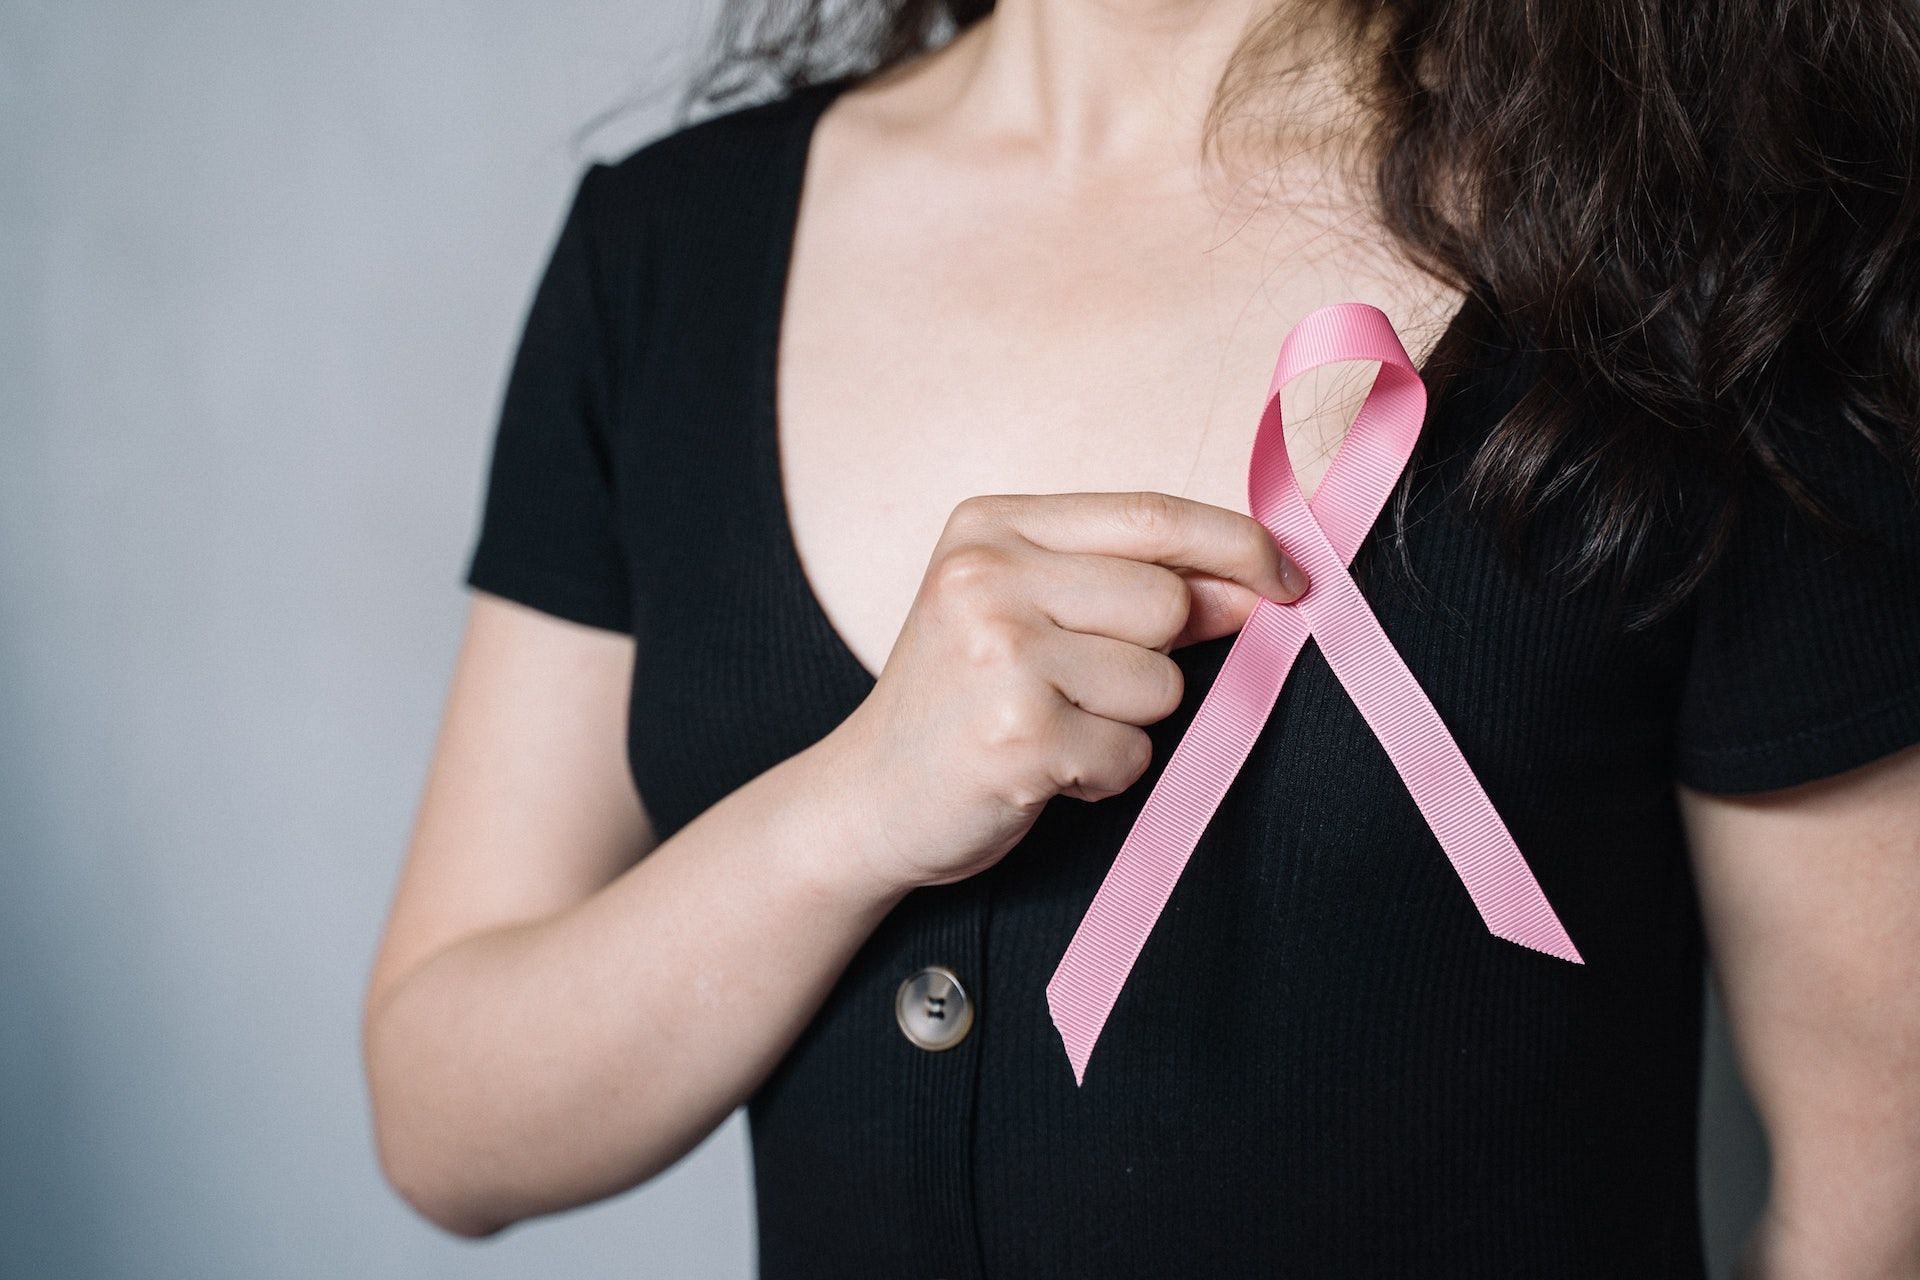 Breast cancer deaths have reduced by two-thirds, a new study reveals. (Image via Pexels/Anna Tarazevich)